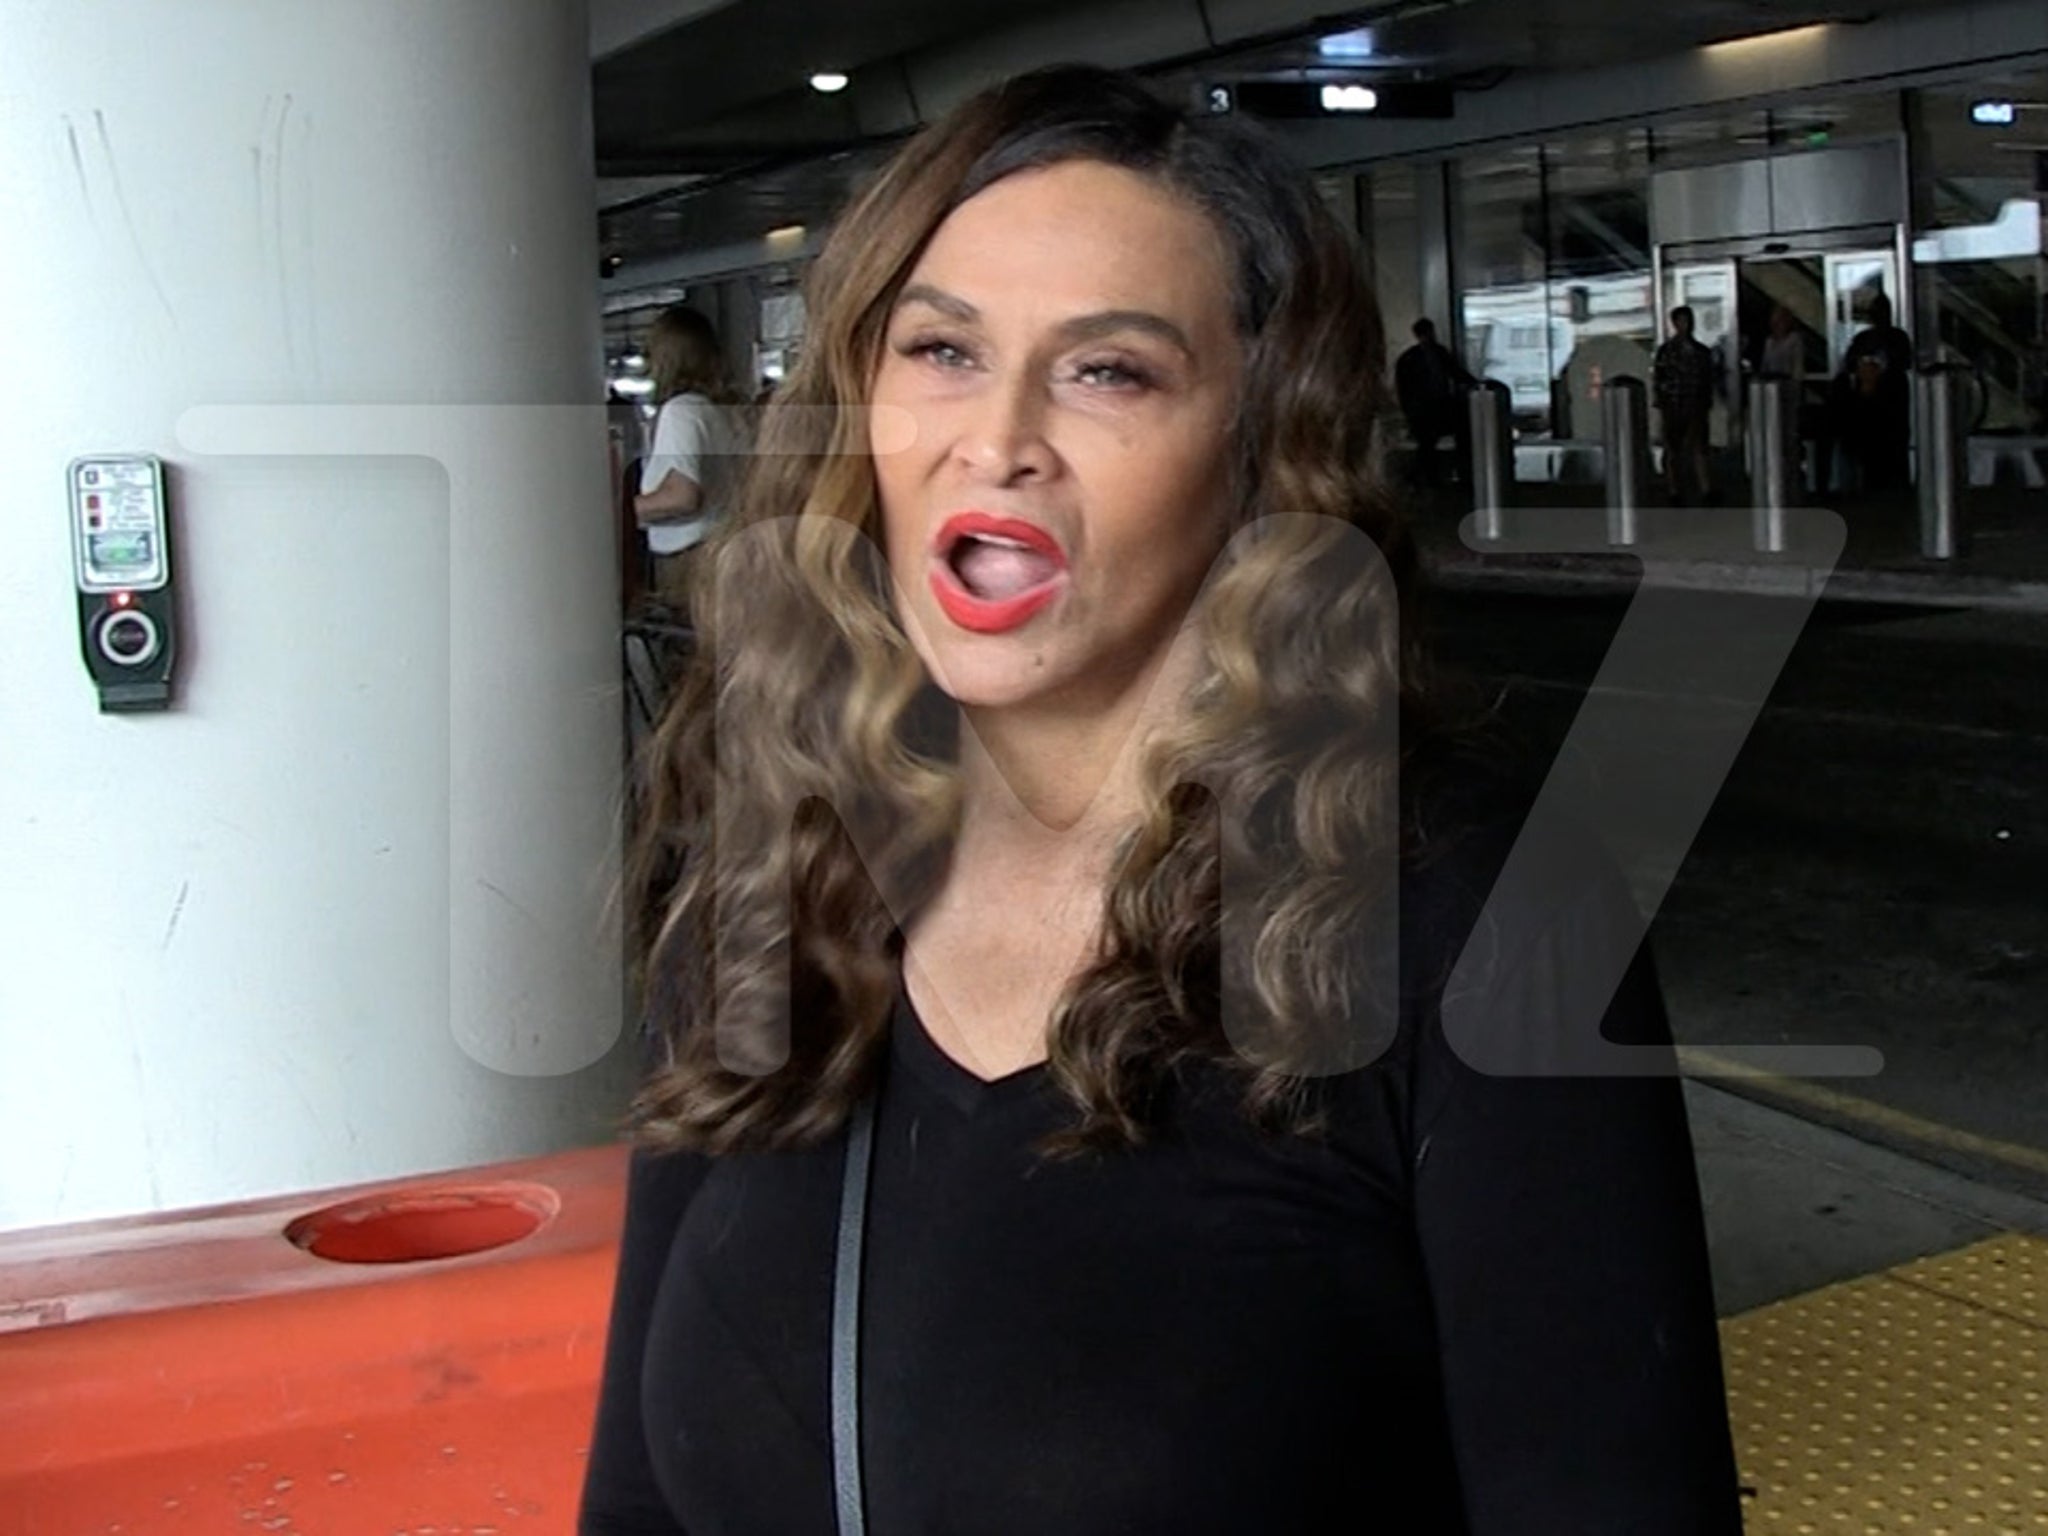 Tina Knowles squashes rumors about Beyoncé's personal toilet seats